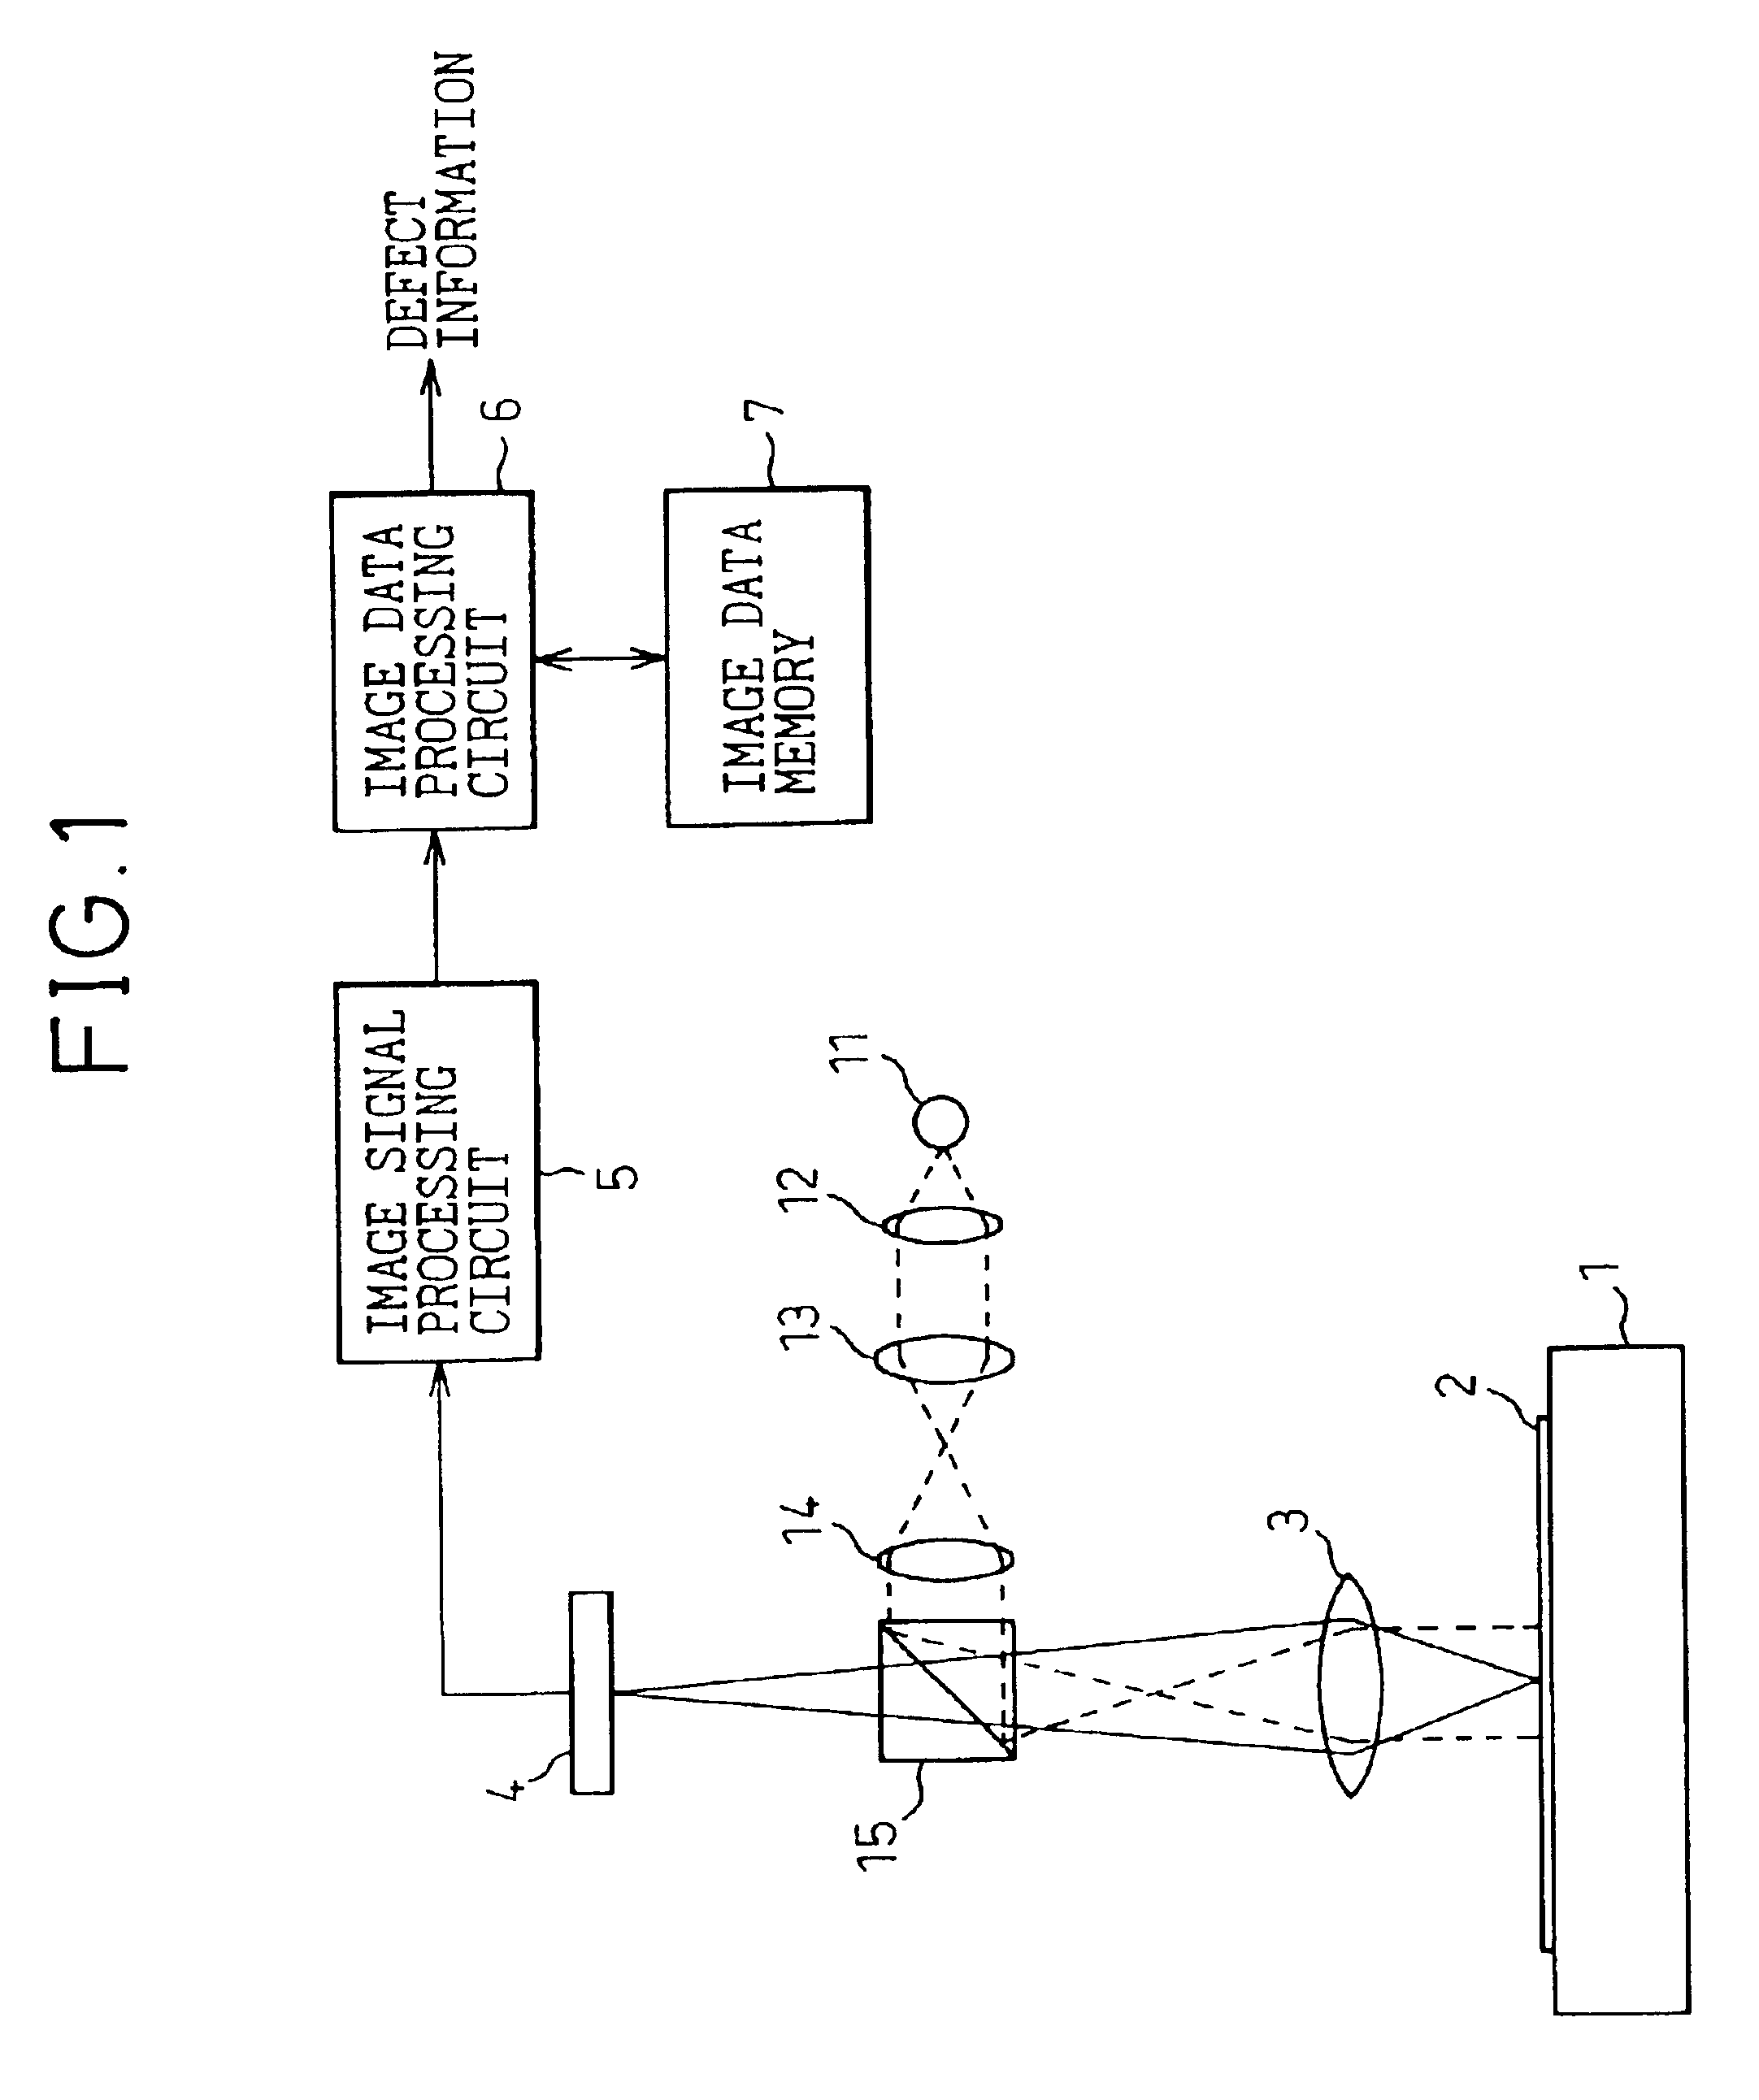 Wafer defect inspection machine having a dual illumination system